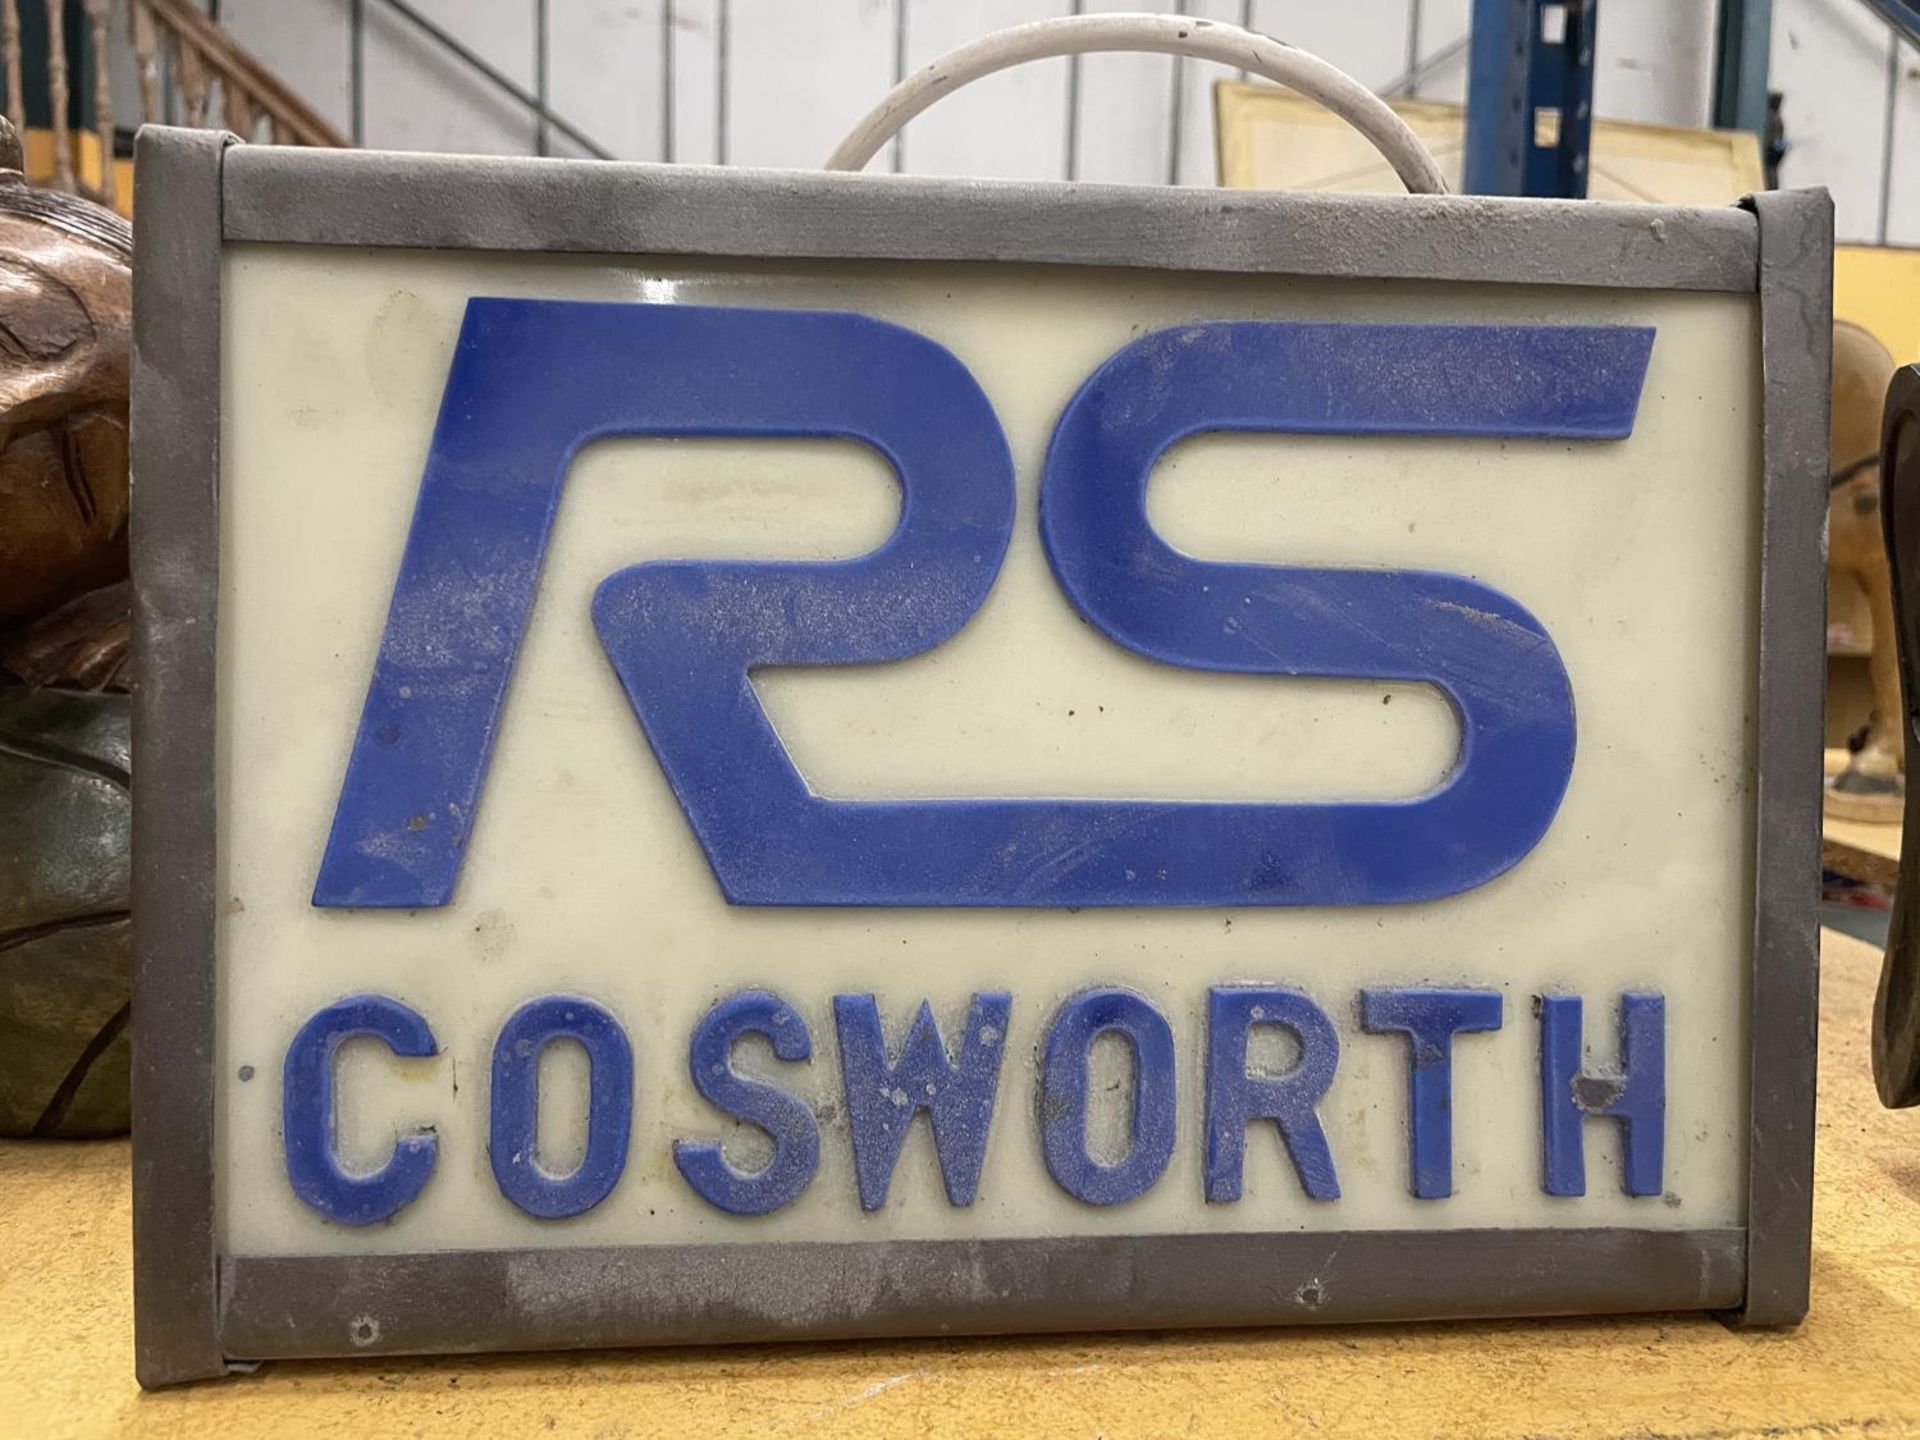 AN RS COSWORTH ILLUMINATED LIGHT BOX SIGN - Image 2 of 4